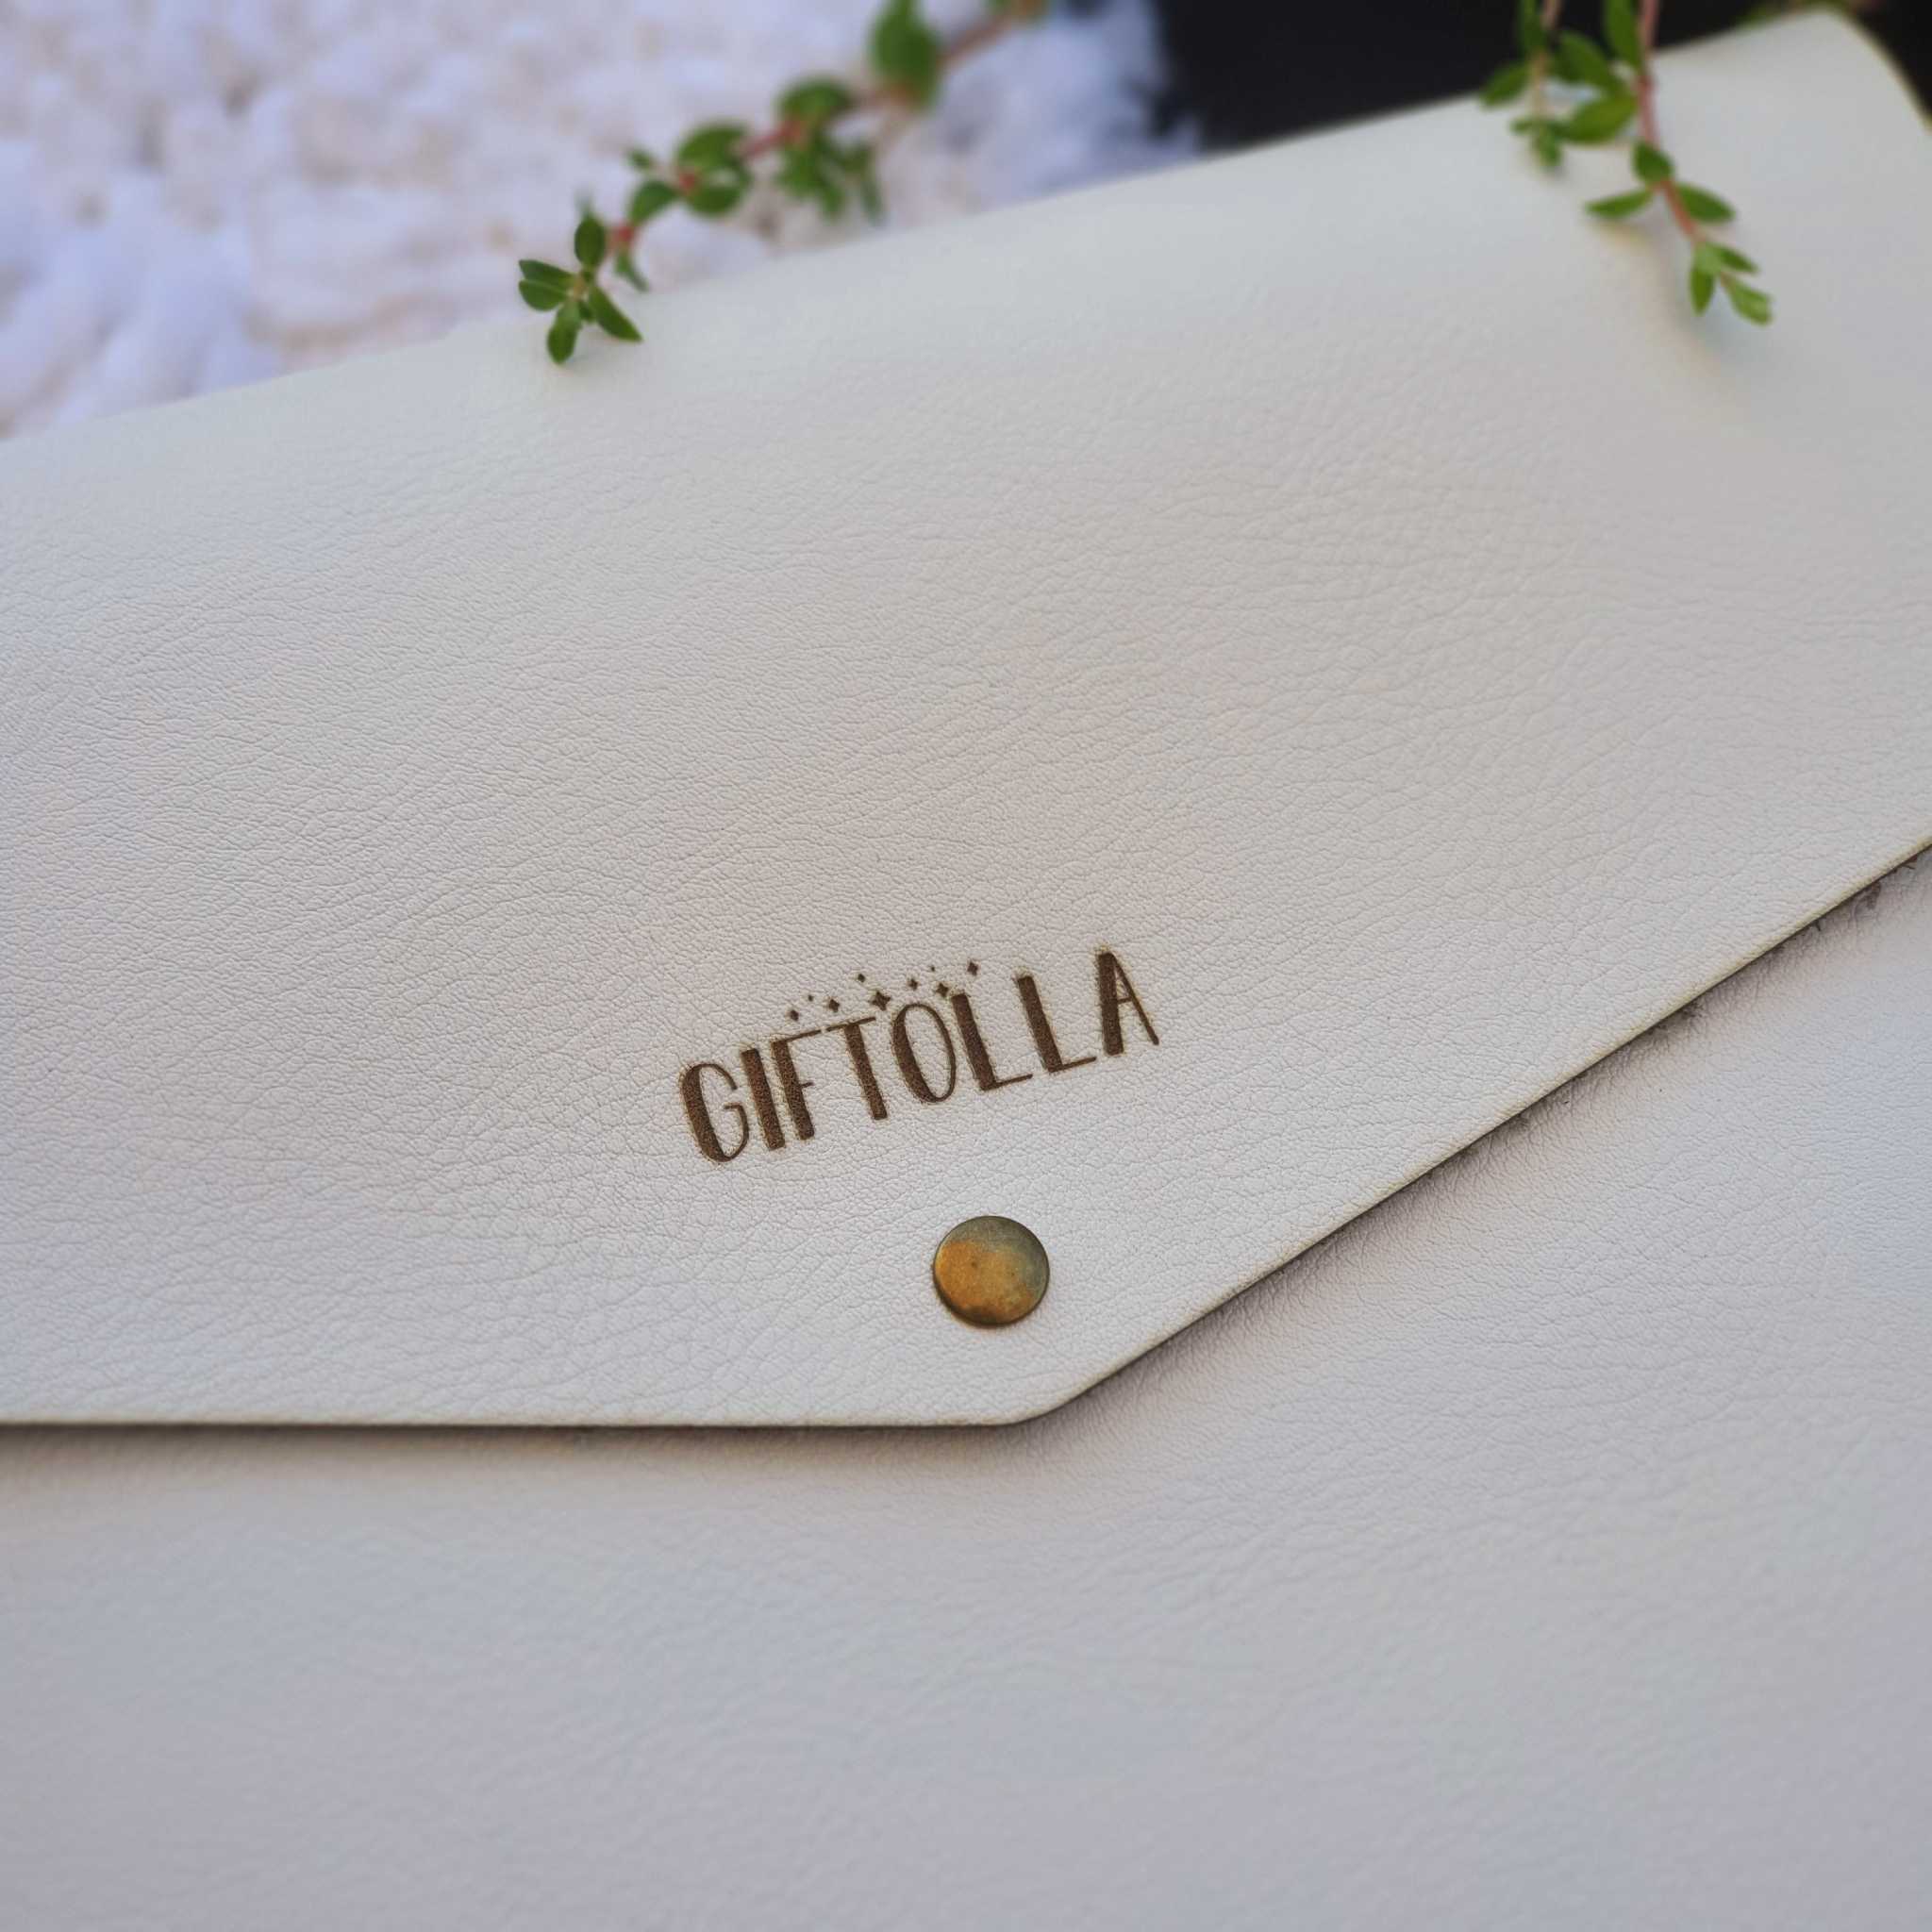 Giftolla Special Bag